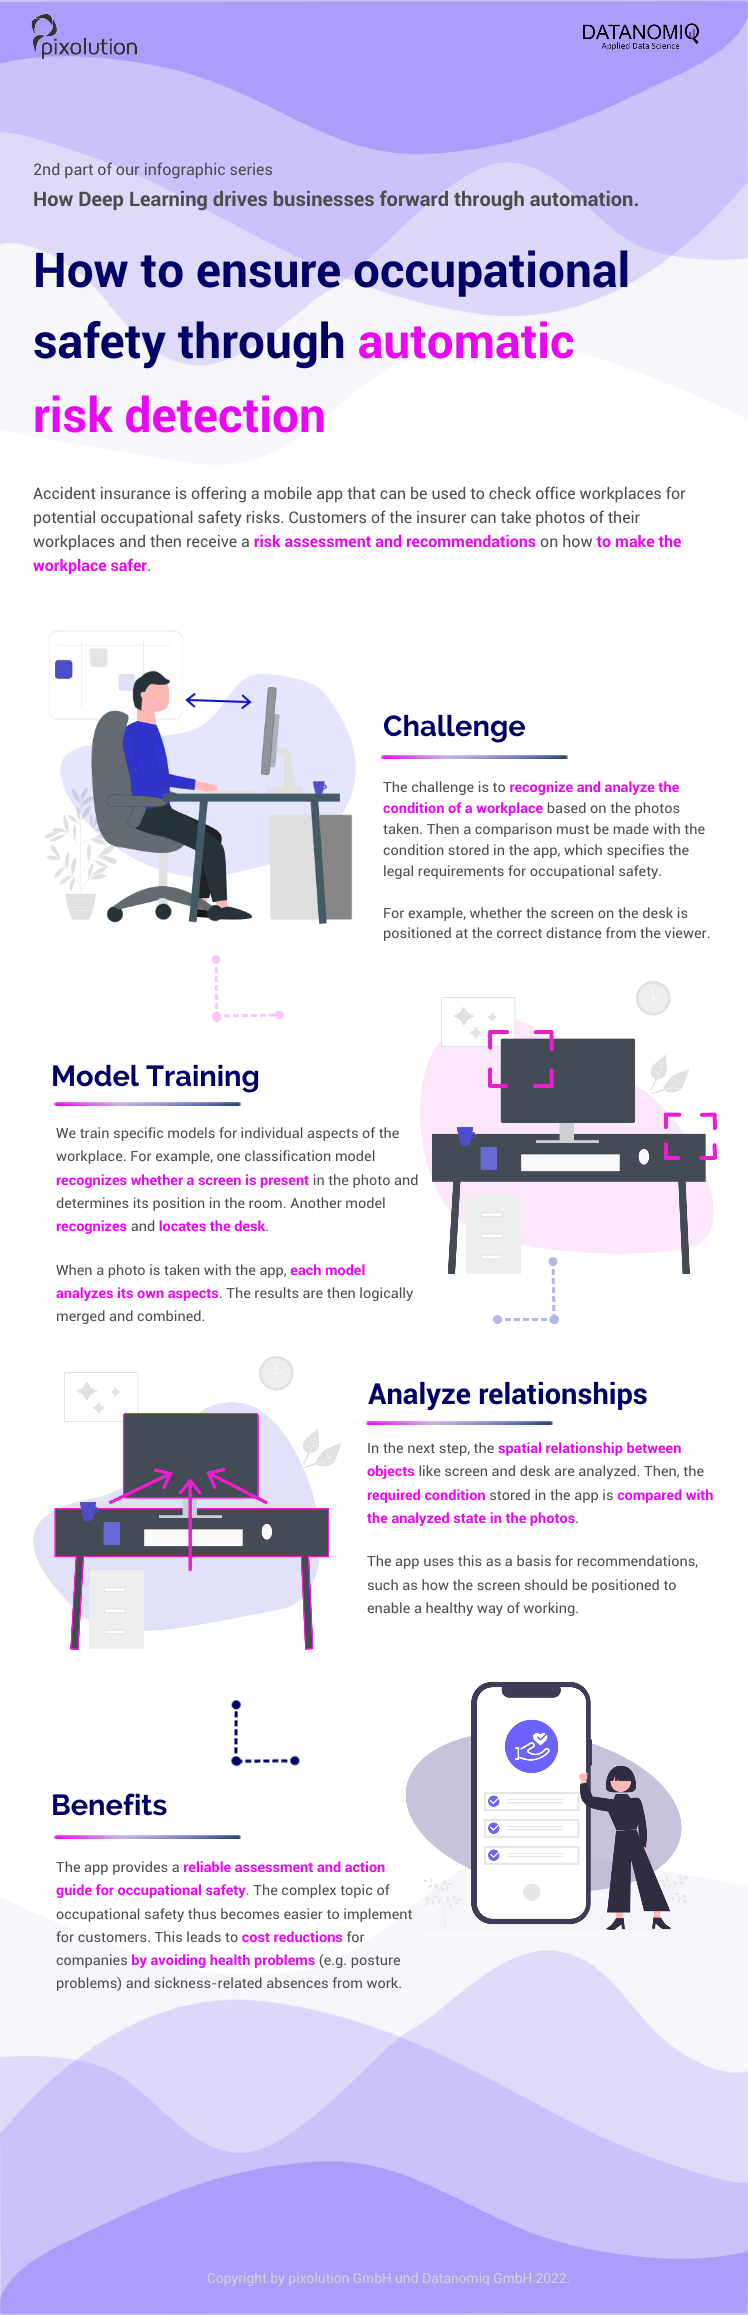 How to ensure occupational safety through automatic risk detection using Deep Learning - Infographic